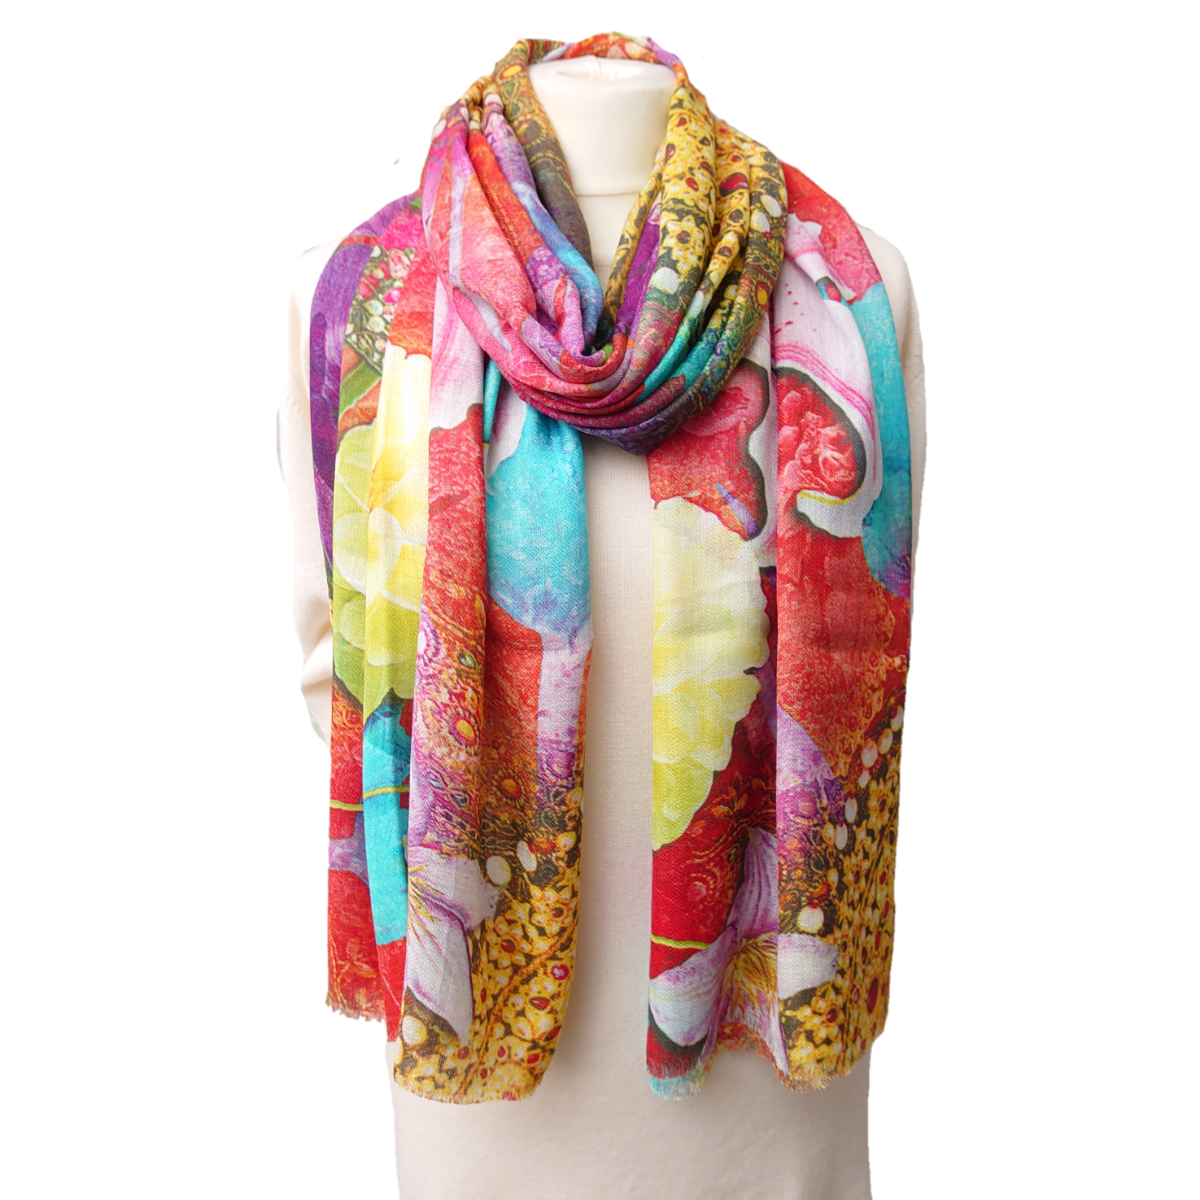 Printed Pashmina Stole - Red with Large Colourful Flowers - TCG London